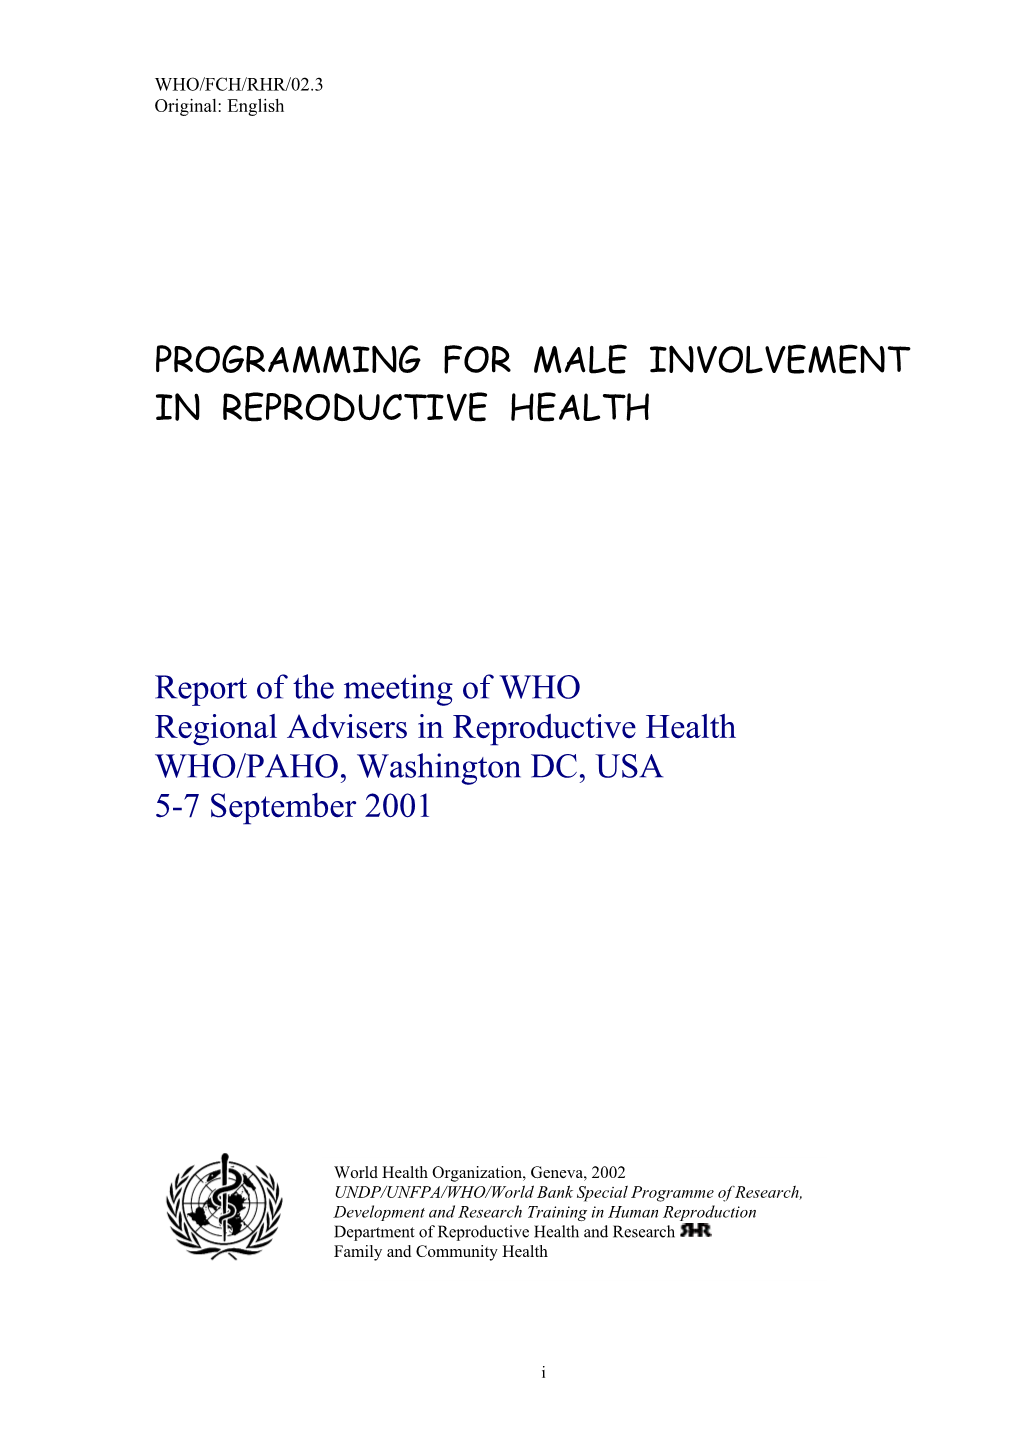 Programming for Male Involvement in Reproductive Health